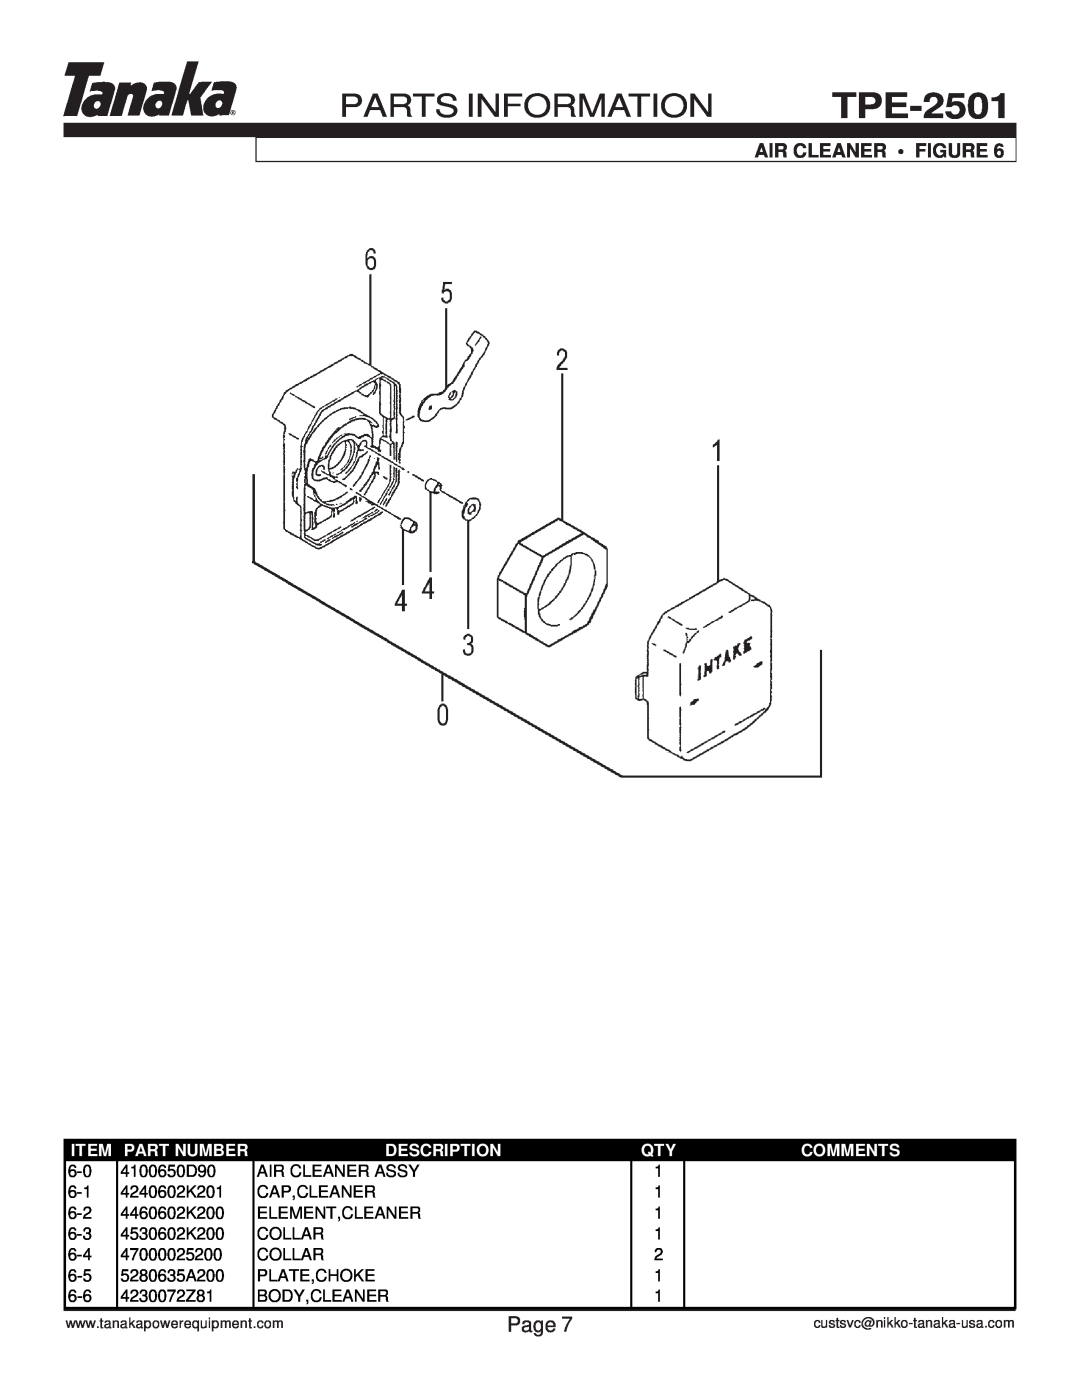 Tanaka TPE-2501 manual Parts Information, Air Cleaner Figure, Page, Part Number, Description, Comments 